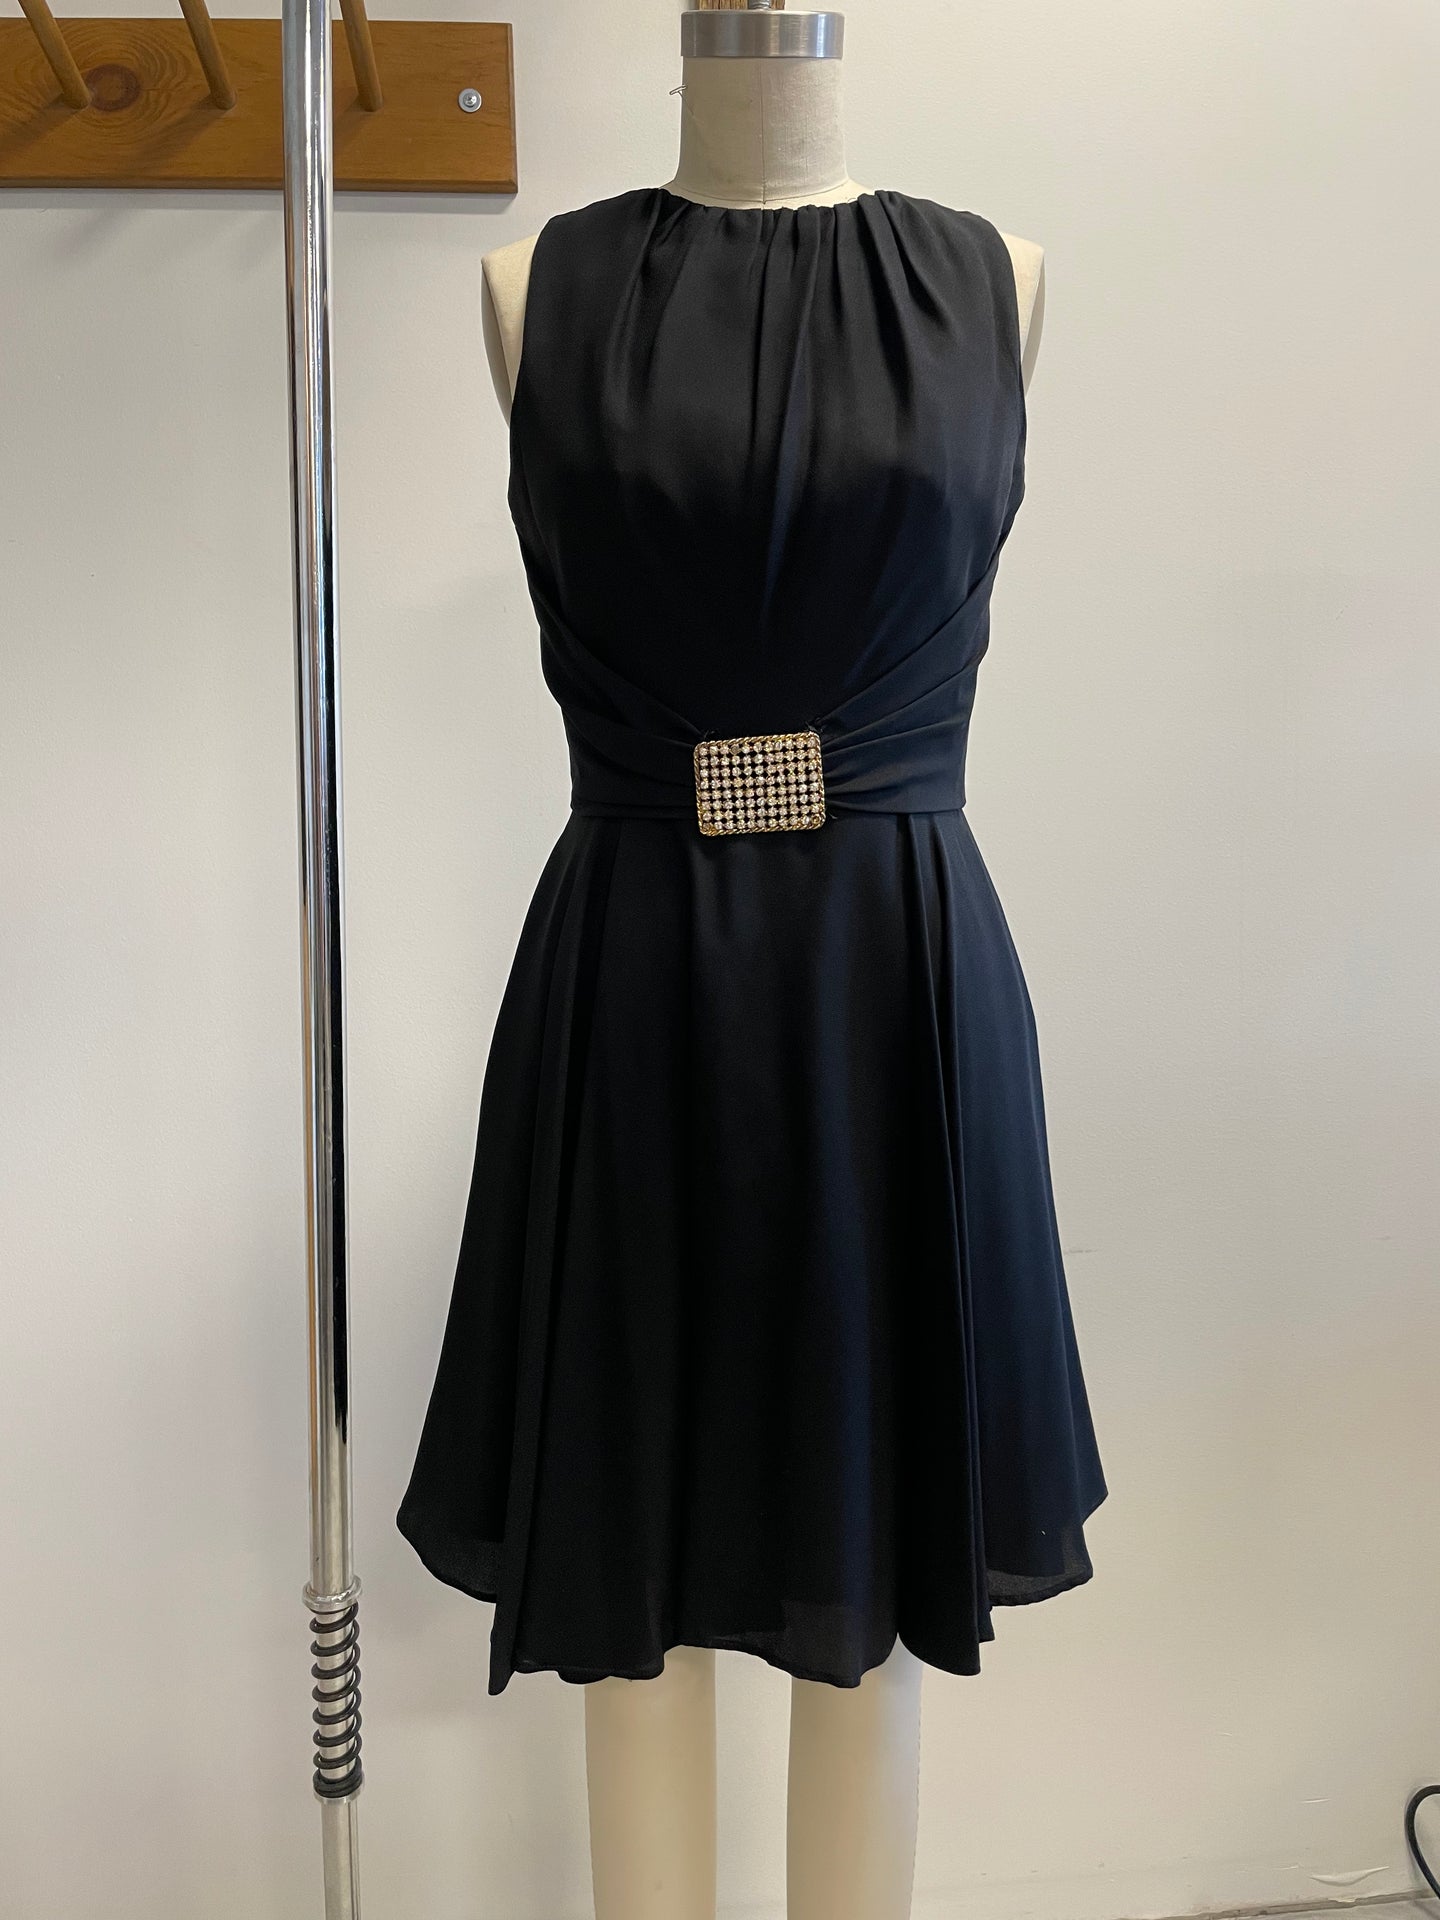 Vintage belted cocktail dress with buckle